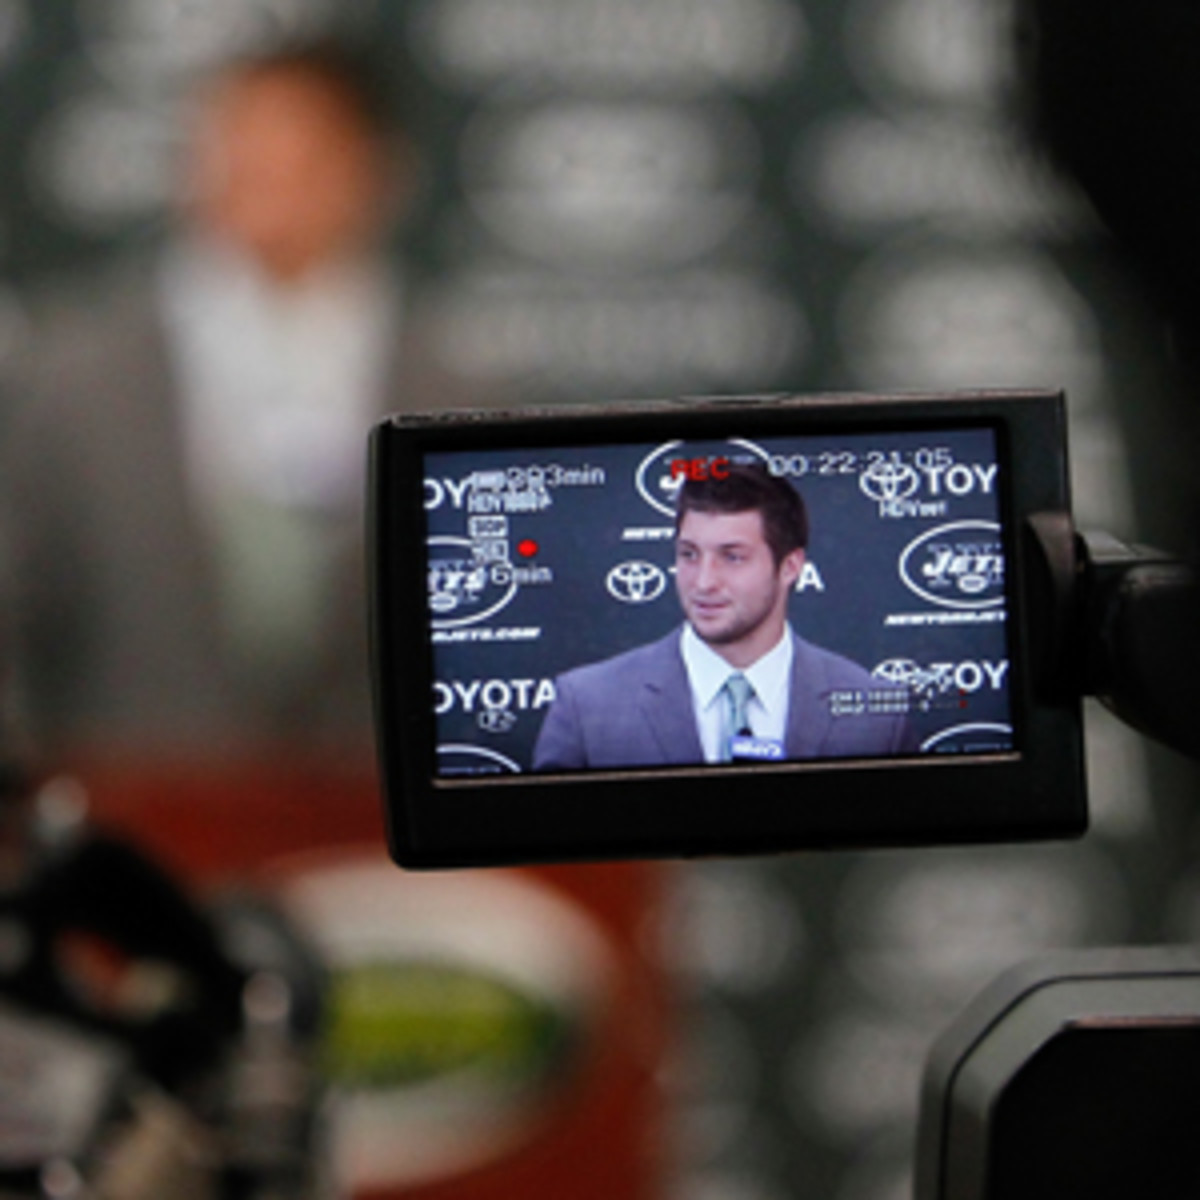 The media circus surrounding Tim Tebow's brief NFL career is a detractor to many teams. (Jeff Zelevansky/Getty Images)